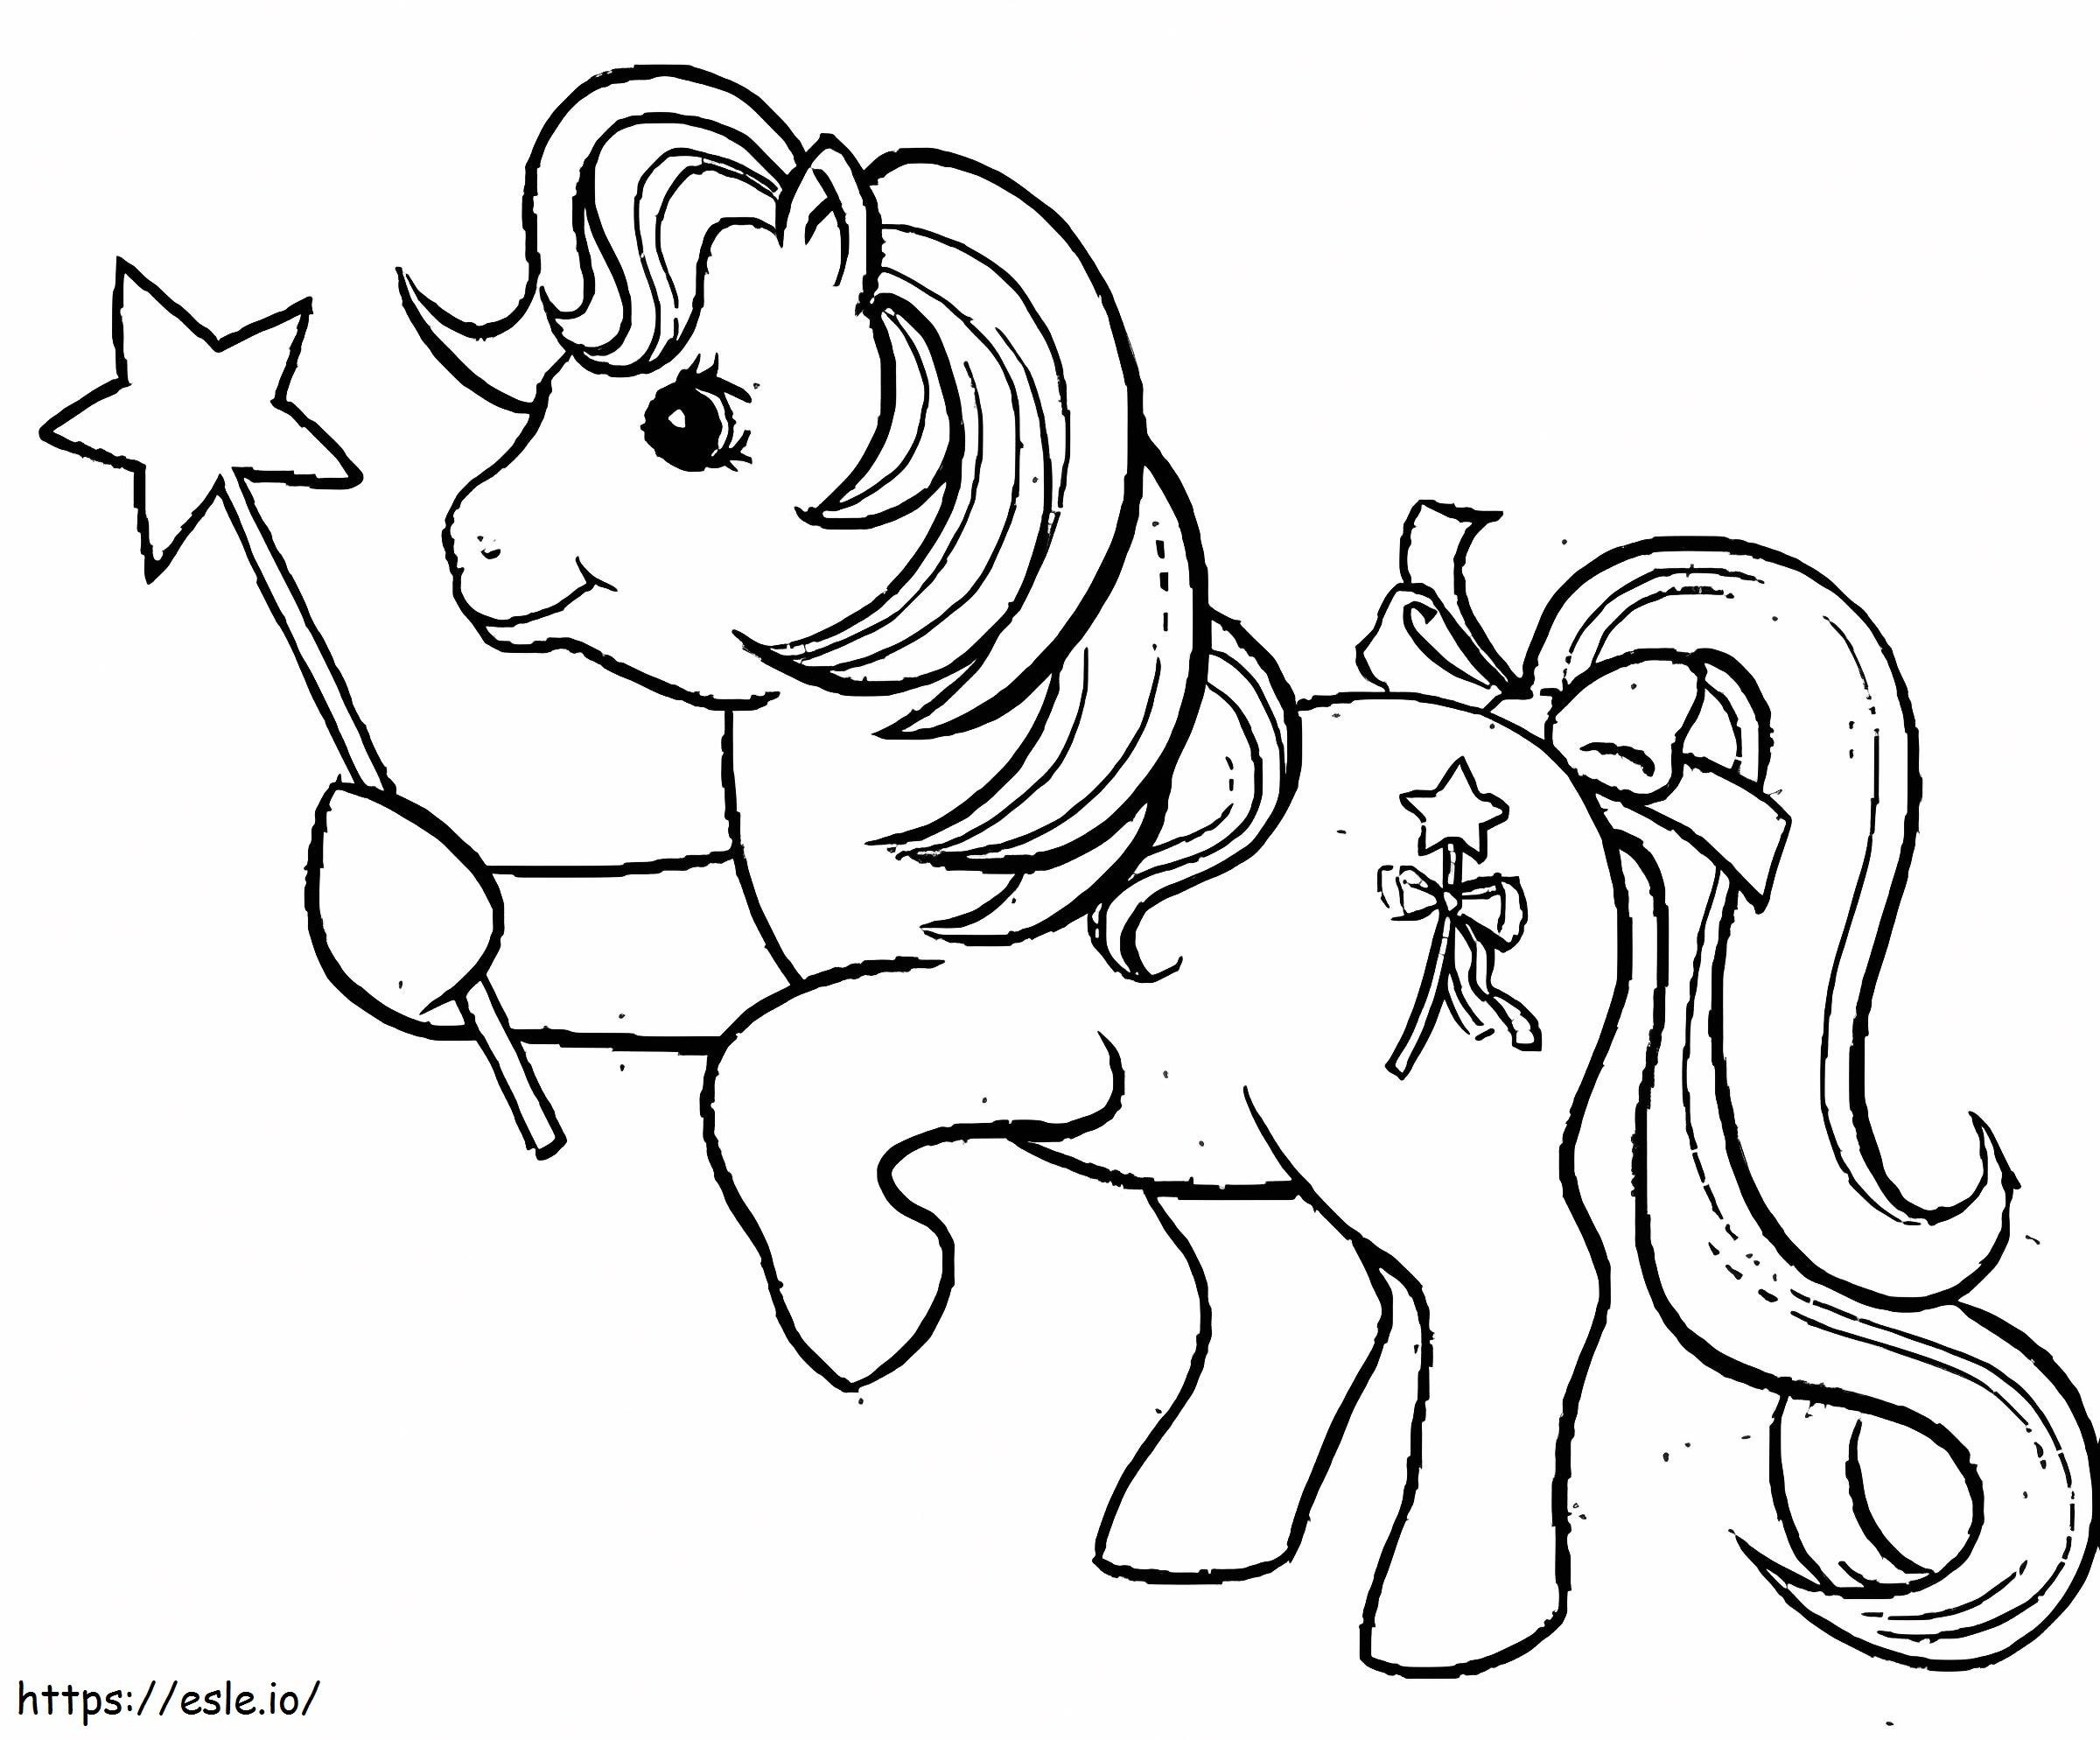 Unicorn With Magic Wand coloring page